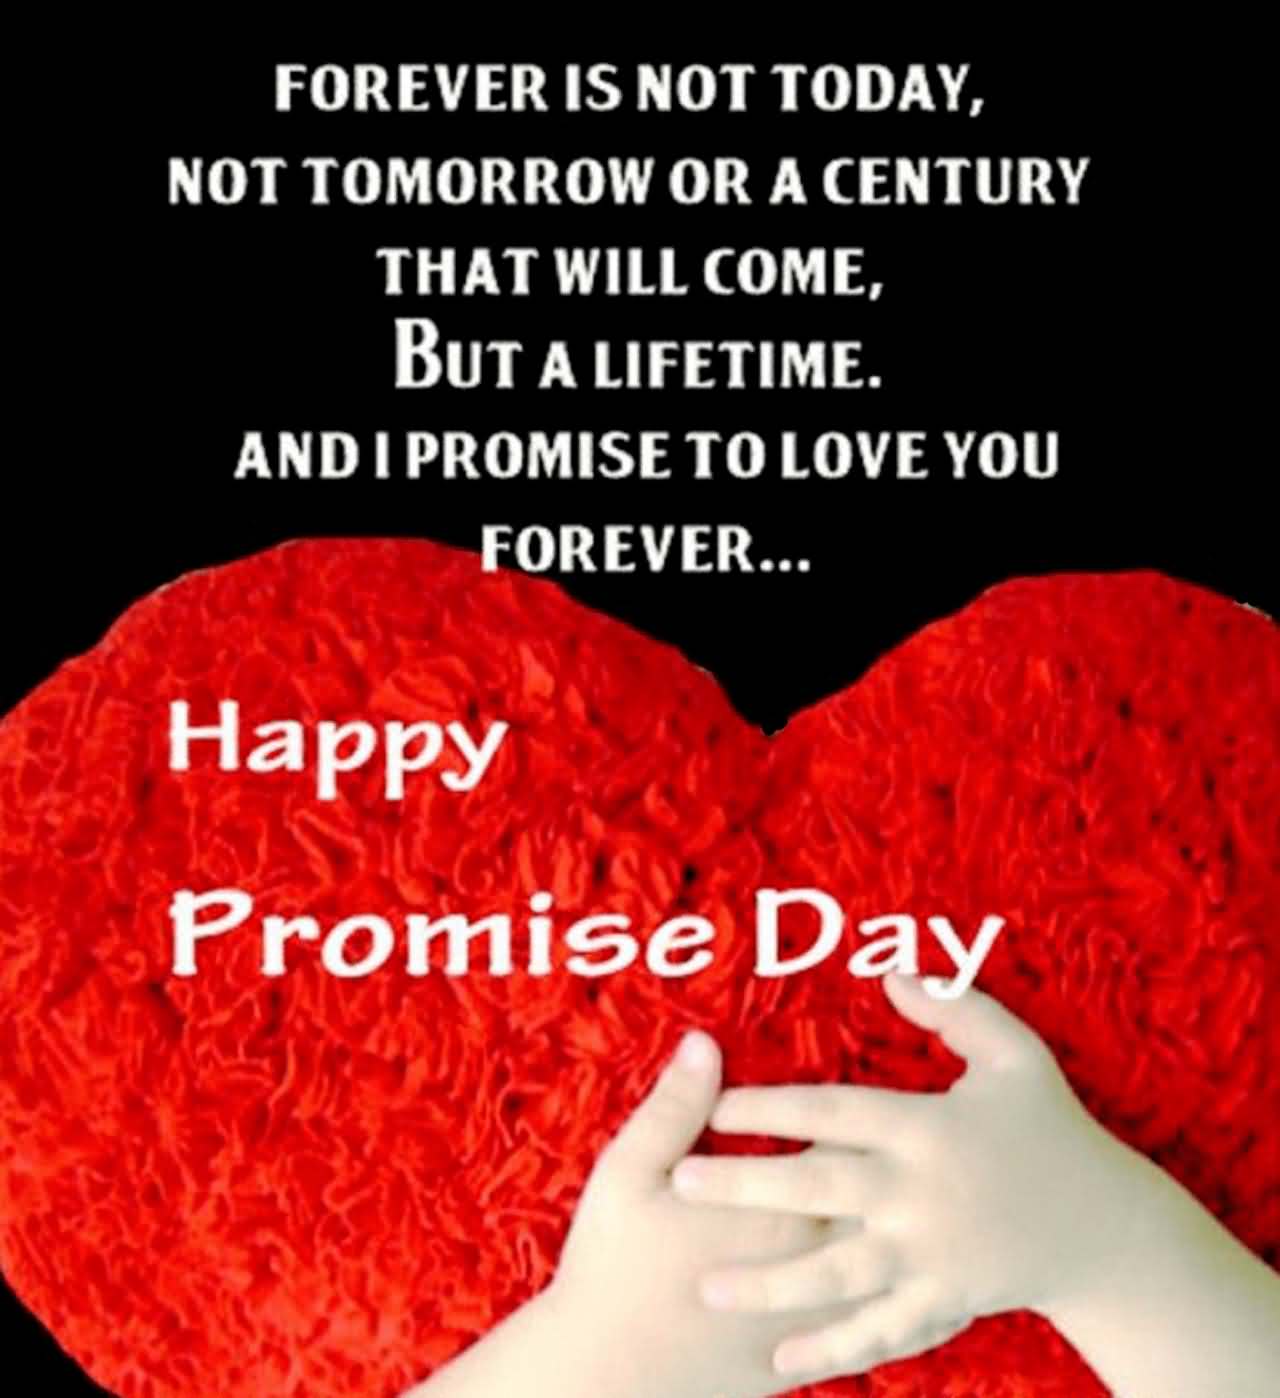 Happy promise day wishes for boyfriend